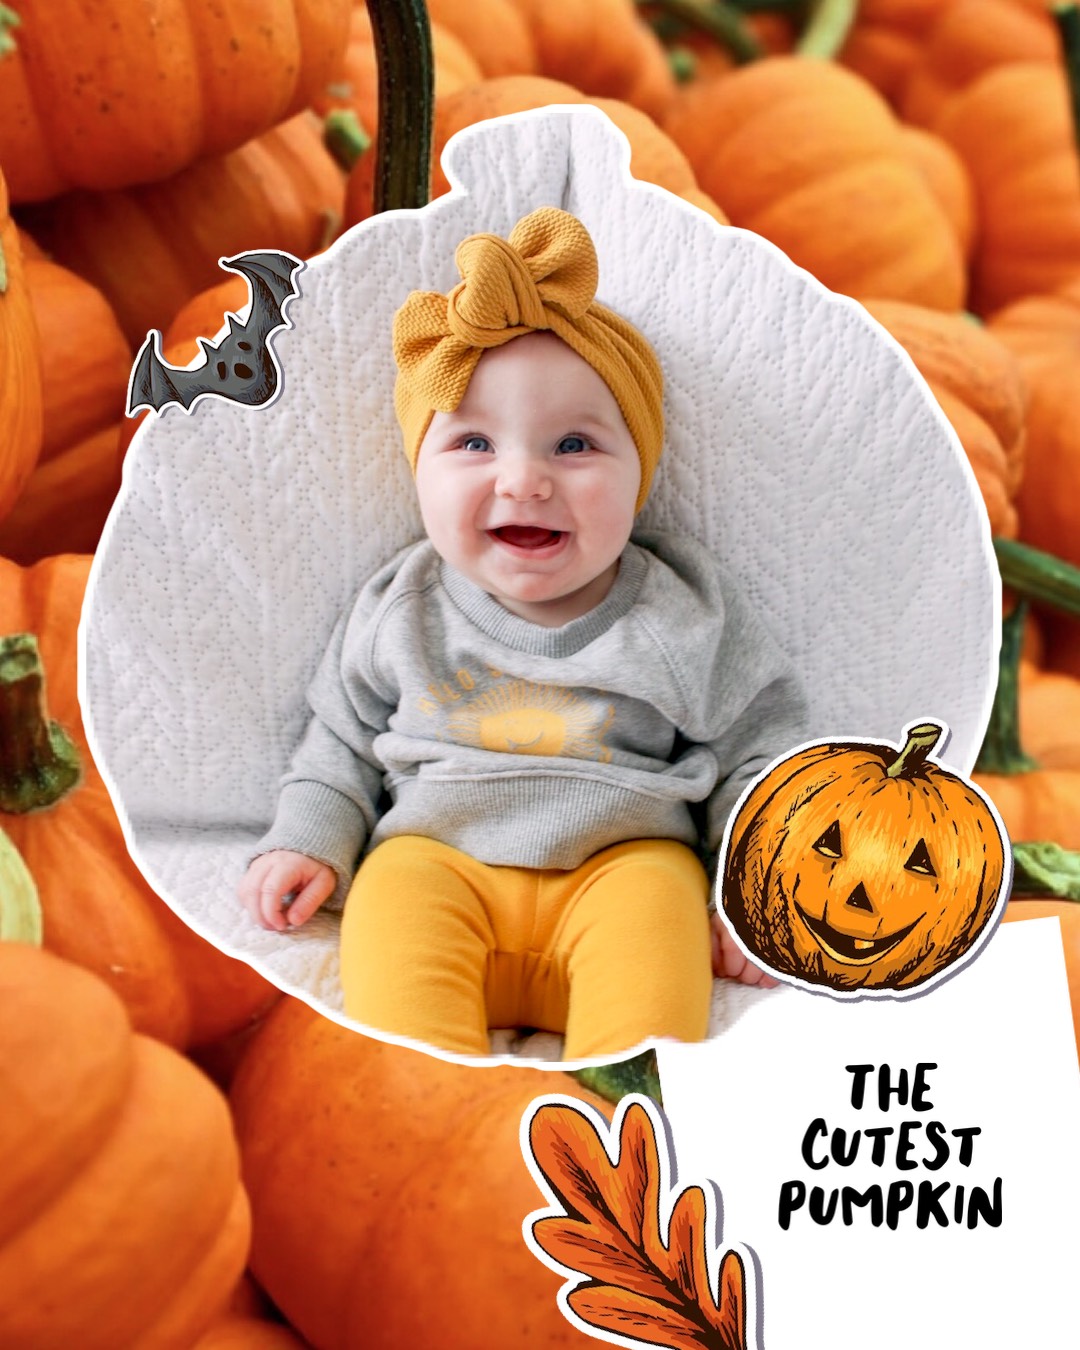 A Baby In A Pumpkin Costume Sitting On A Pile Of Pumpkins Halloween Template